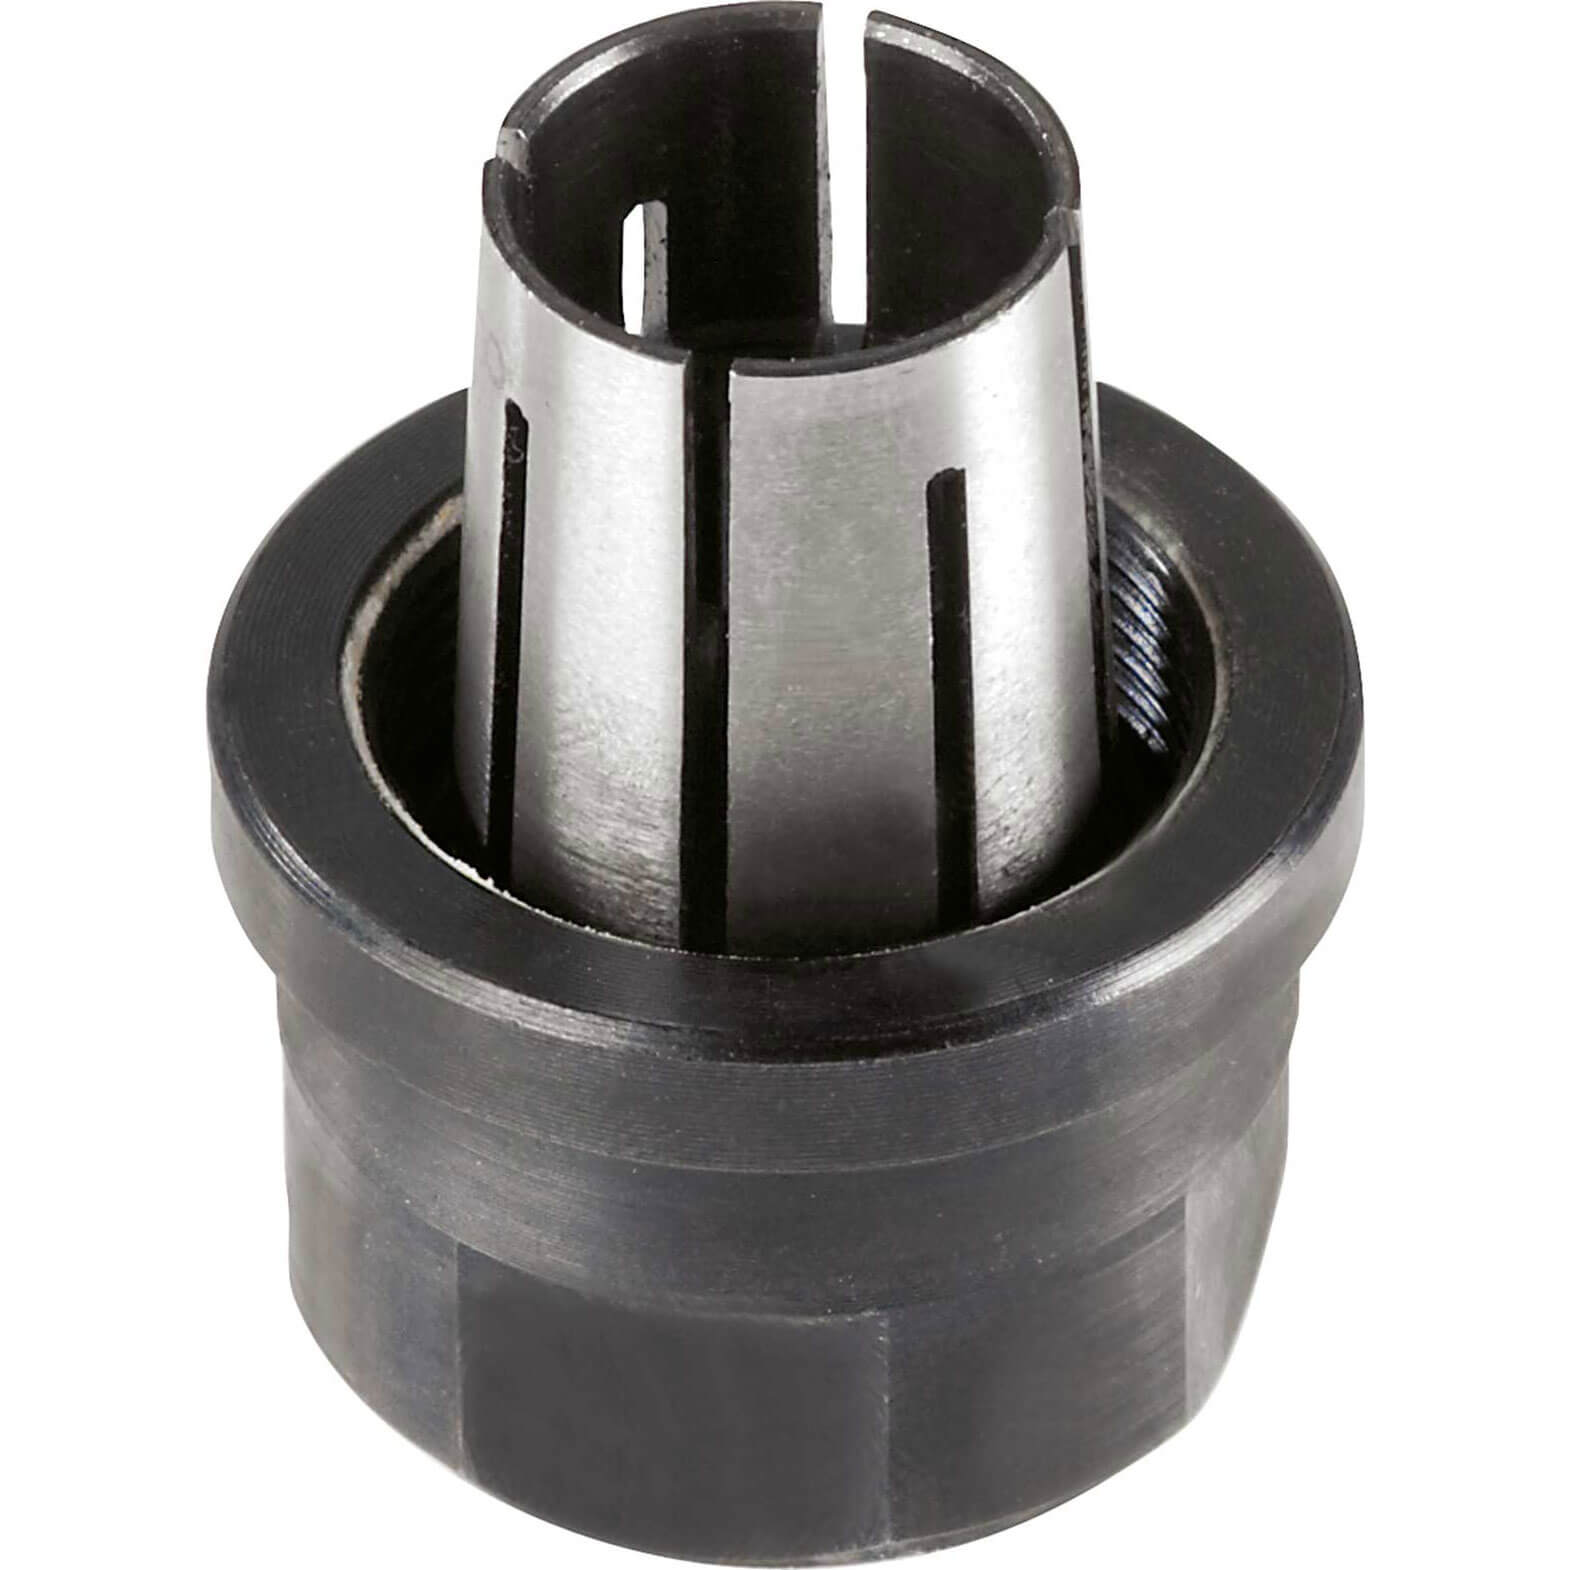 Photo of Festool Router Collet For Festool Router Of2200 1/2